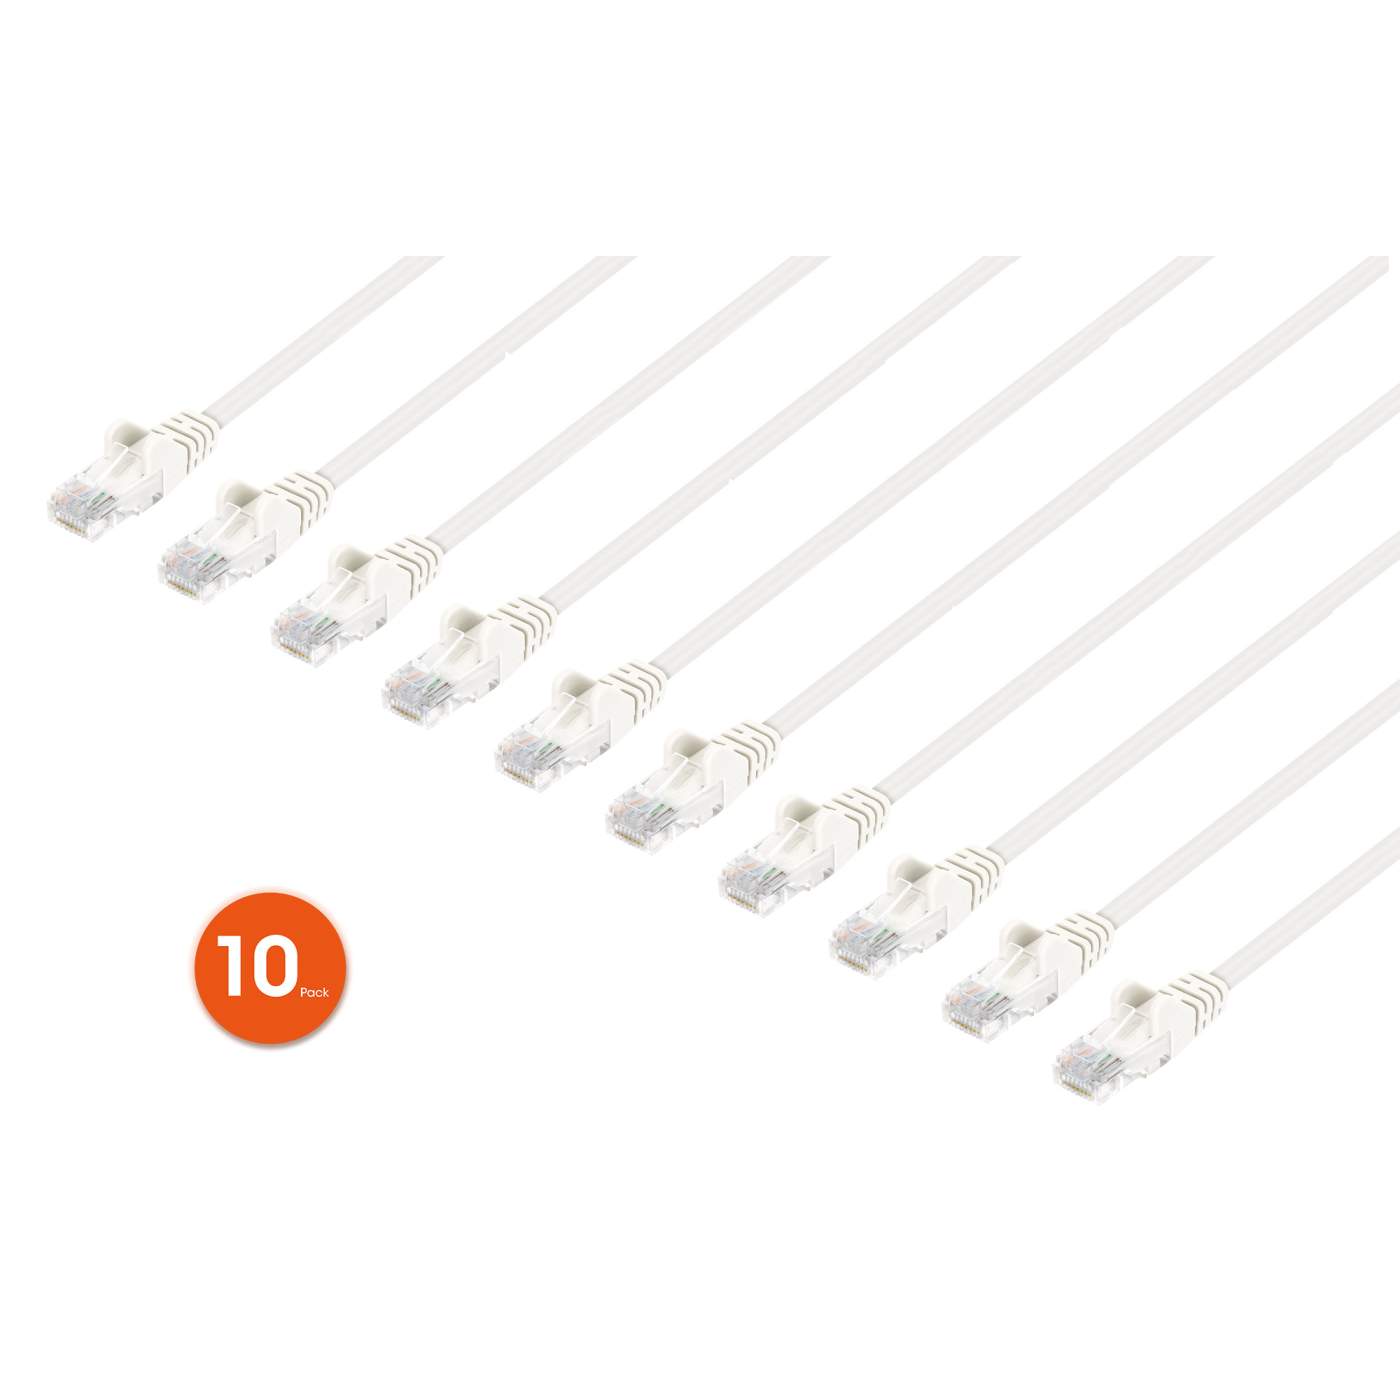 Cat6 U/UTP Slim Network Patch Cable, 7 ft., White, 10-Pack Image 1